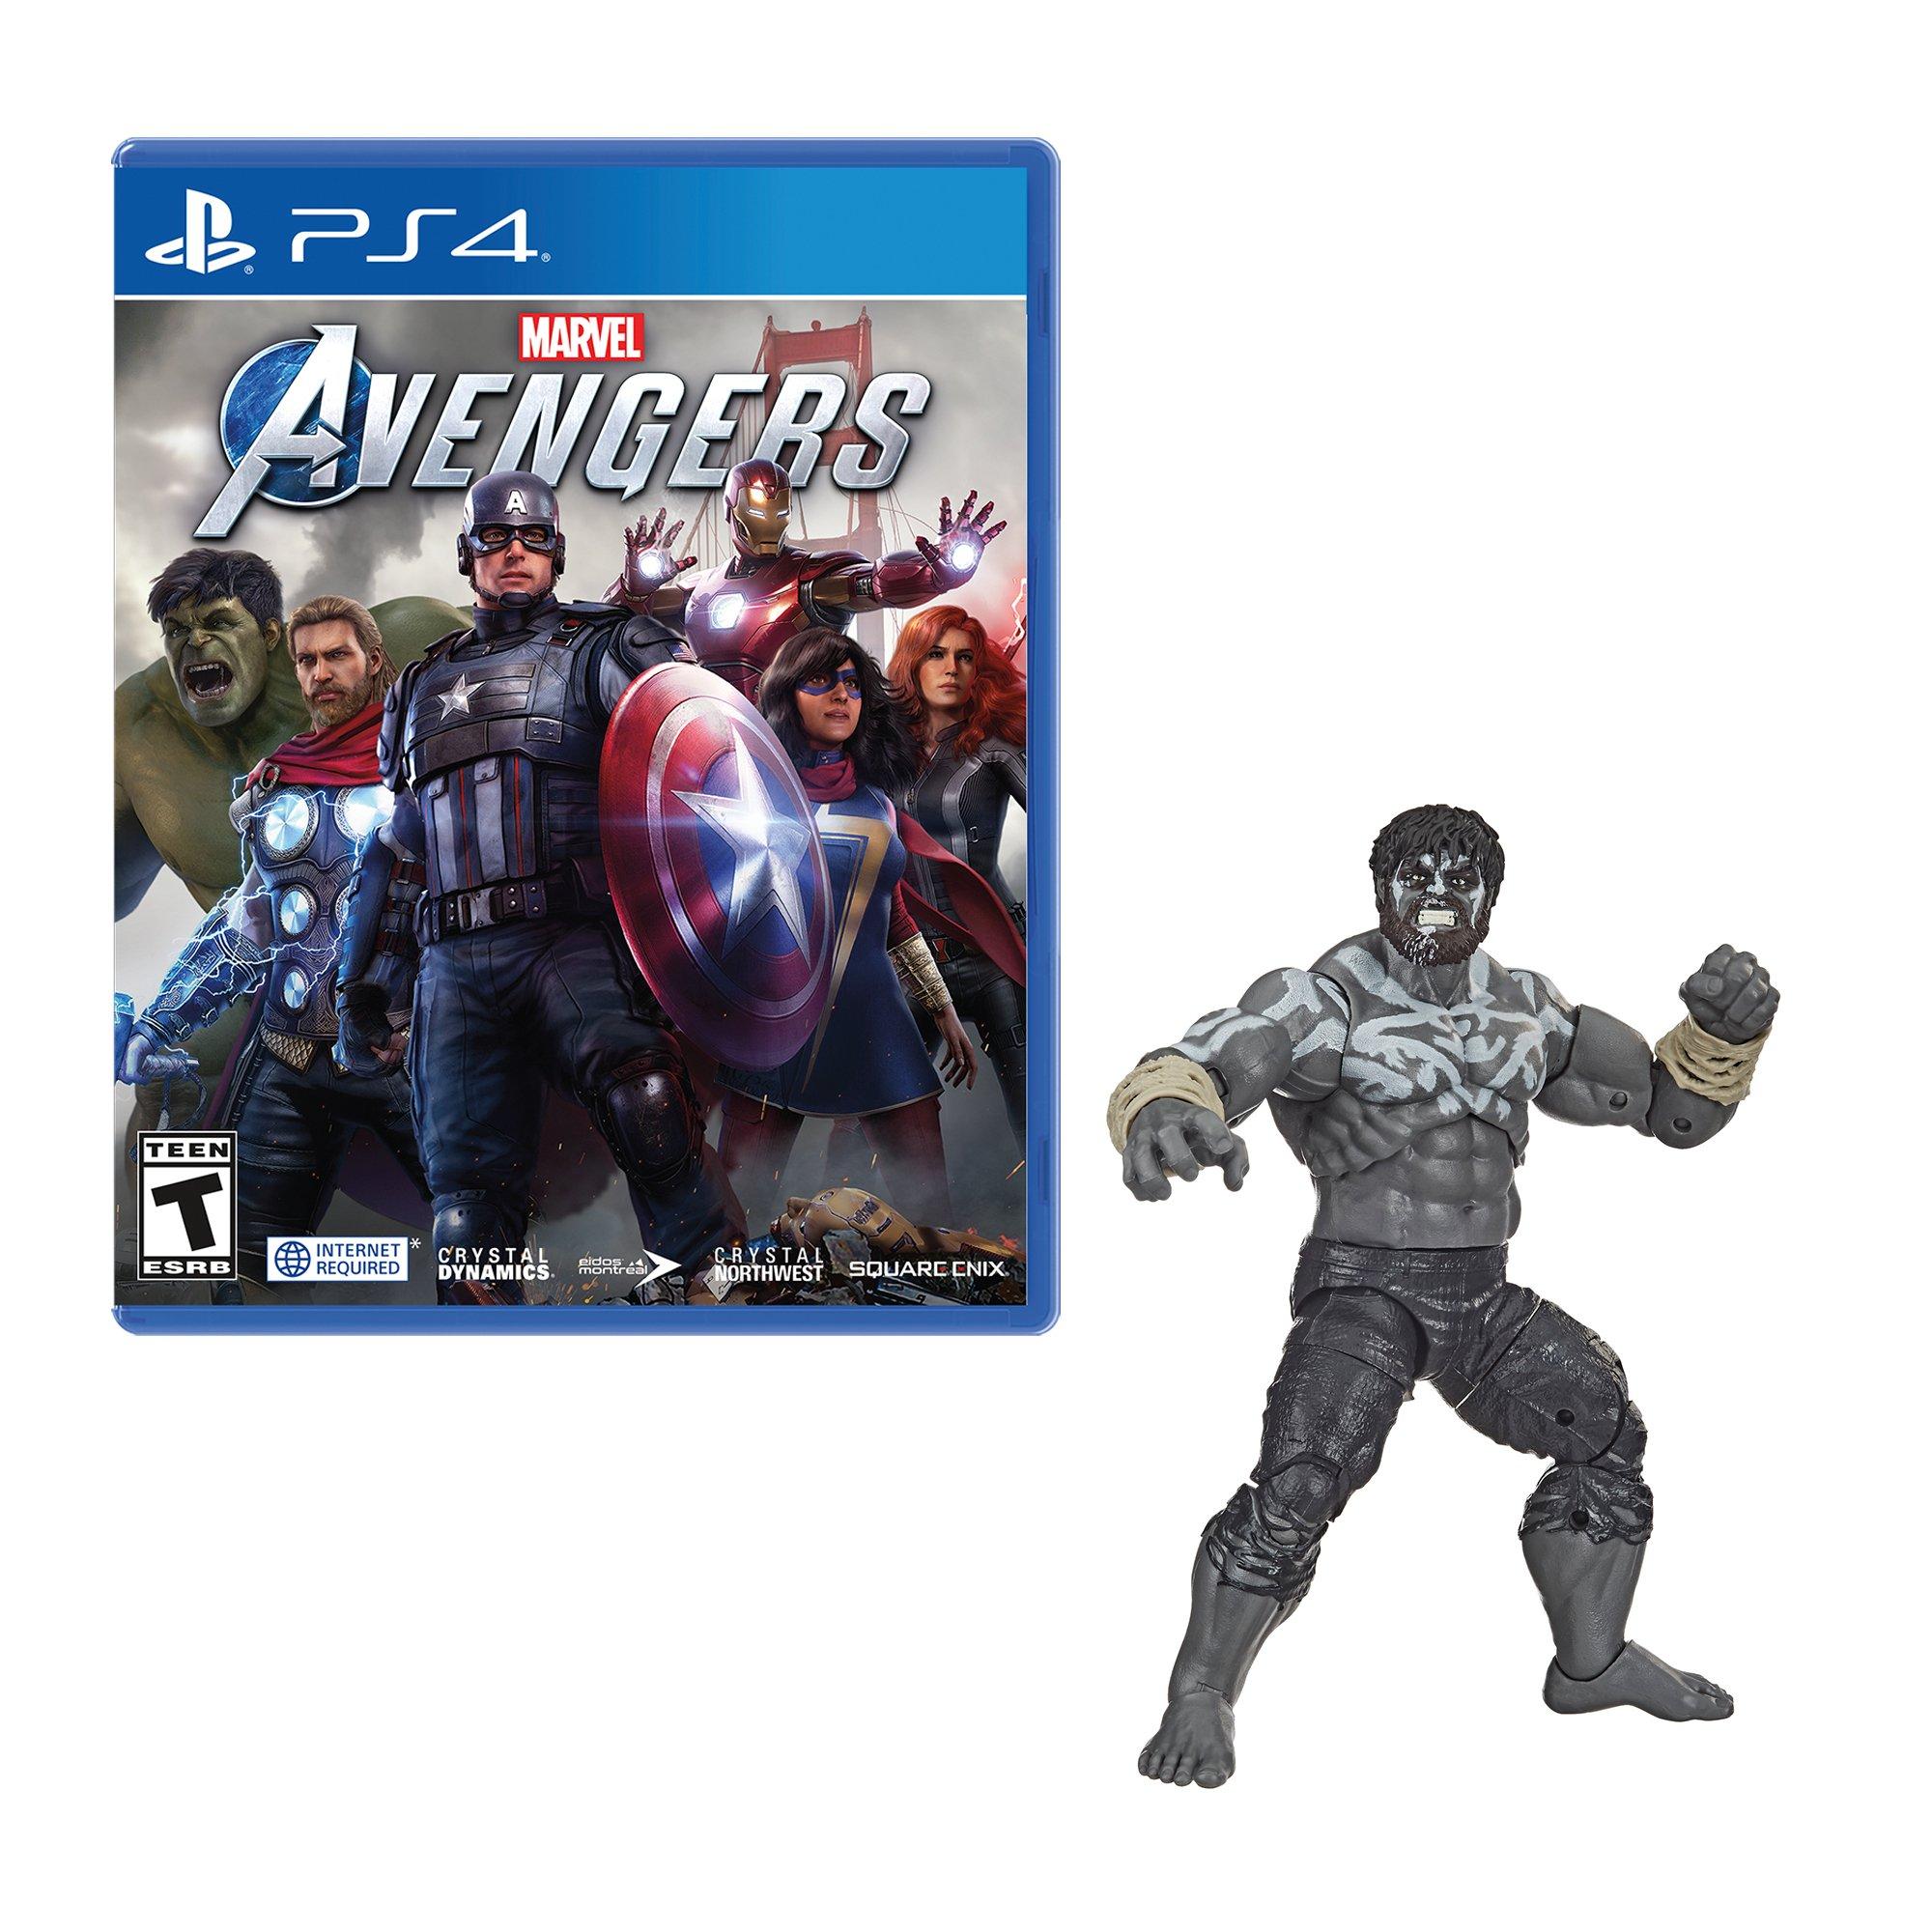 Playstation 4 Marvel S Avengers And Hulk Figure Only At Gamestop Playstation 4 Gamestop